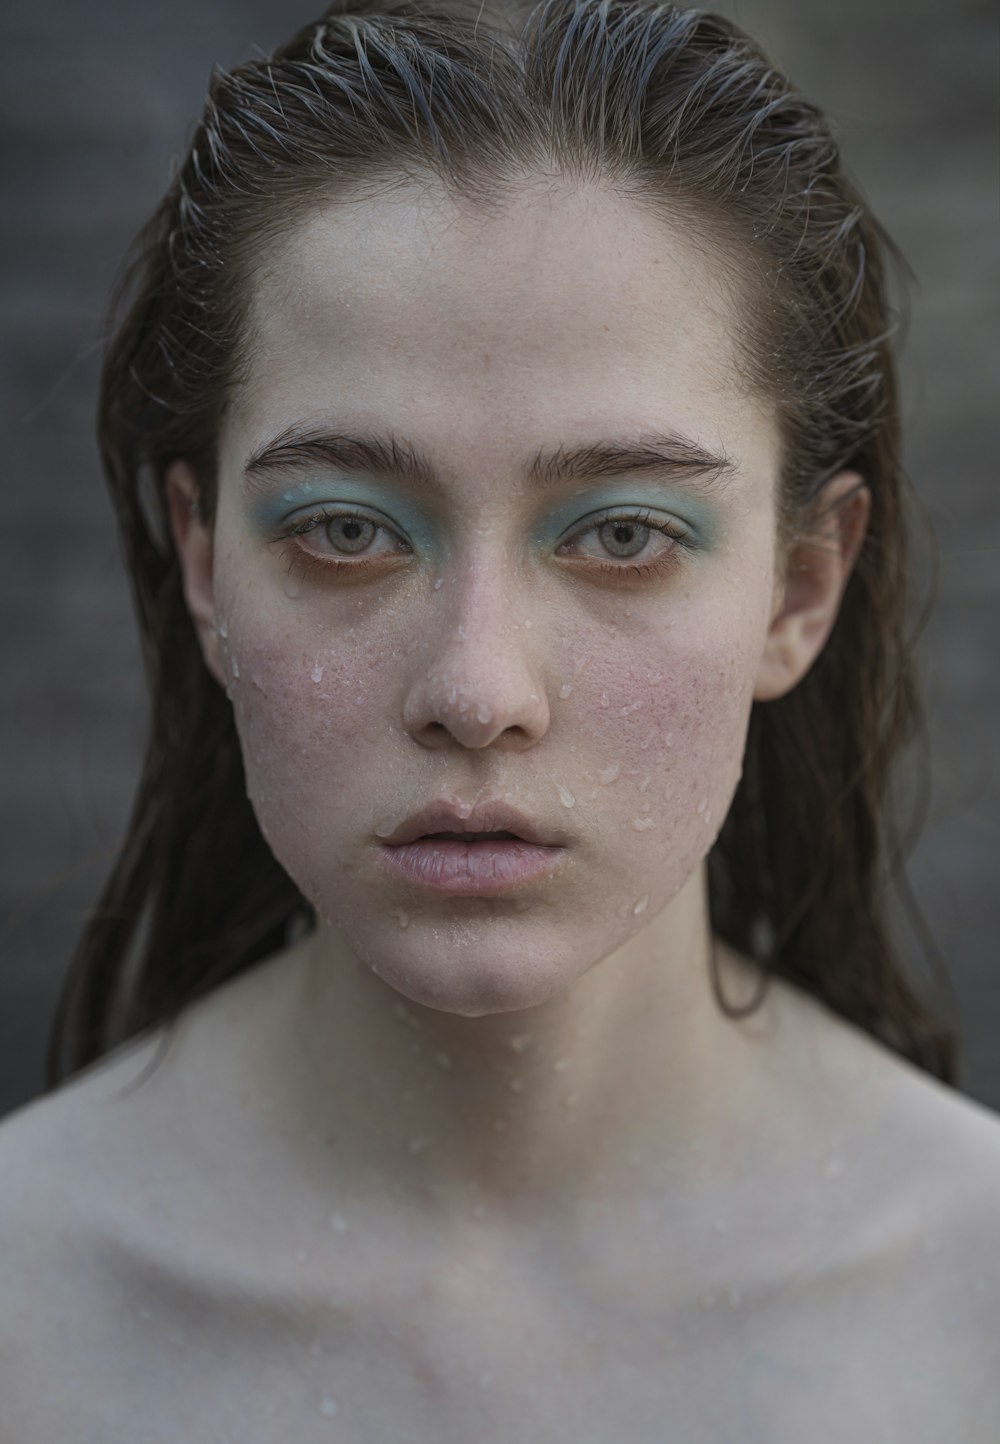 a woman with blue eyes and freckles on her face